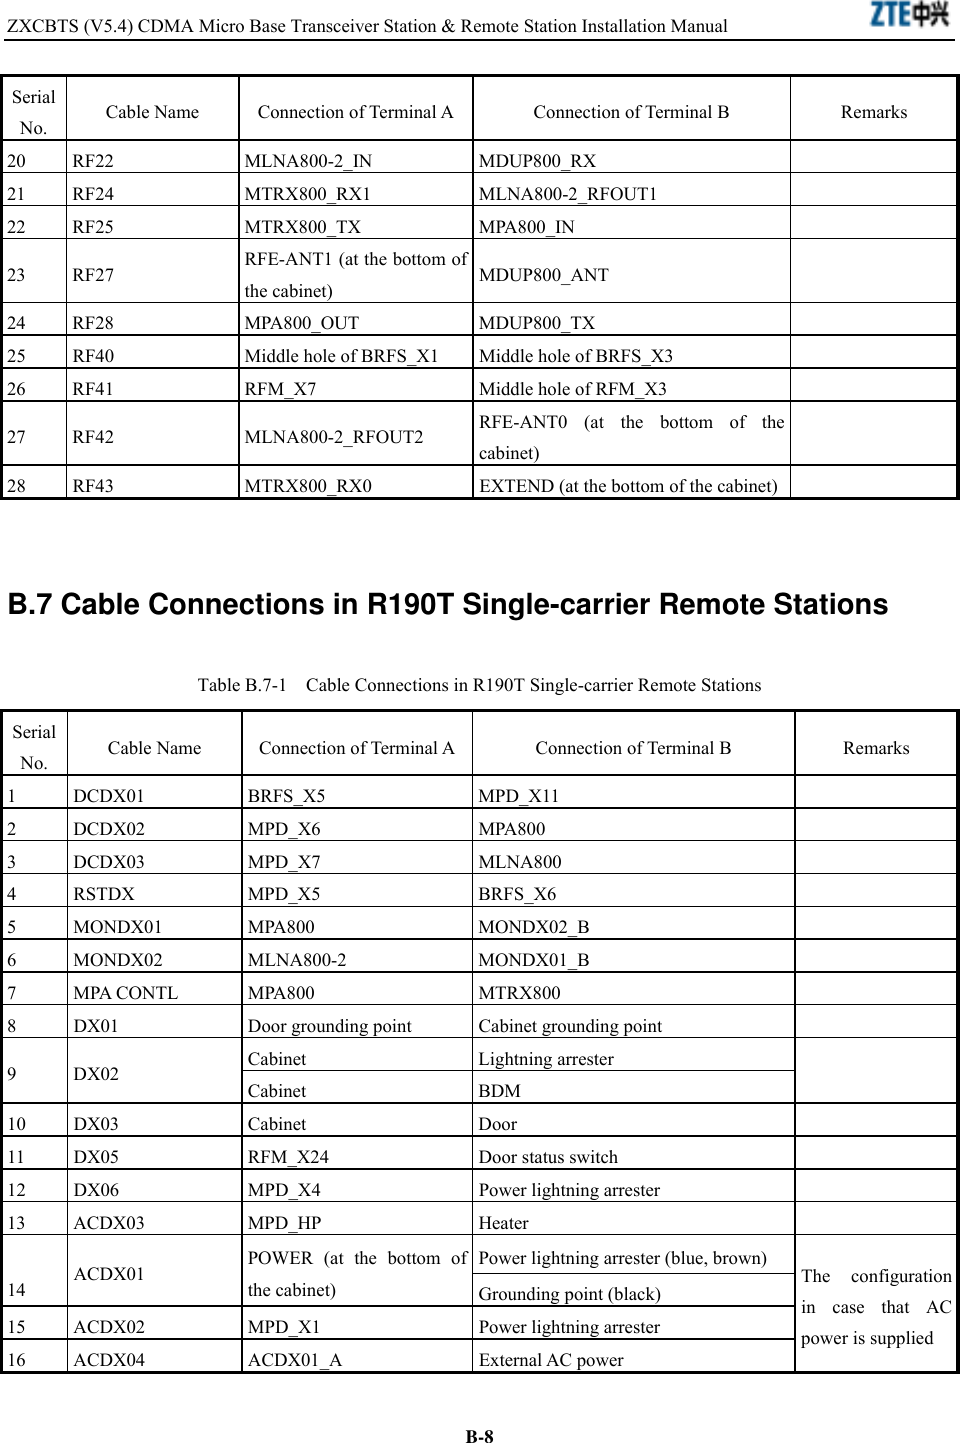 ZXCBTS (V5.4) CDMA Micro Base Transceiver Station &amp; Remote Station Installation Manual    B-8Serial No.  Cable Name  Connection of Terminal A Connection of Terminal B  Remarks 20 RF22  MLNA800-2_IN  MDUP800_RX   21 RF24  MTRX800_RX1  MLNA800-2_RFOUT1   22 RF25  MTRX800_TX  MPA800_IN   23 RF27  RFE-ANT1 (at the bottom of the cabinet)  MDUP800_ANT  24 RF28  MPA800_OUT  MDUP800_TX   25  RF40  Middle hole of BRFS_X1  Middle hole of BRFS_X3   26  RF41  RFM_X7  Middle hole of RFM_X3   27 RF42  MLNA800-2_RFOUT2  RFE-ANT0 (at the bottom of the cabinet)   28  RF43  MTRX800_RX0  EXTEND (at the bottom of the cabinet)    B.7 Cable Connections in R190T Single-carrier Remote Stations Table B.7-1    Cable Connections in R190T Single-carrier Remote Stations Serial No.  Cable Name  Connection of Terminal A Connection of Terminal B  Remarks 1 DCDX01  BRFS_X5  MPD_X11   2 DCDX02  MPD_X6  MPA800   3 DCDX03  MPD_X7  MLNA800   4 RSTDX  MPD_X5  BRFS_X6   5 MONDX01  MPA800  MONDX02_B   6 MONDX02  MLNA800-2  MONDX01_B   7 MPA CONTL  MPA800  MTRX800   8  DX01  Door grounding point  Cabinet grounding point   Cabinet Lightning arrester  9 DX02 Cabinet BDM  10 DX03  Cabinet  Door   11  DX05  RFM_X24  Door status switch   12  DX06  MPD_X4  Power lightning arrester   13 ACDX03  MPD_HP  Heater   Power lightning arrester (blue, brown)  14  ACDX01  POWER (at the bottom of the cabinet)  Grounding point (black) 15  ACDX02  MPD_X1  Power lightning arrester 16 ACDX04  ACDX01_A  External AC power The configuration in case that AC power is supplied 